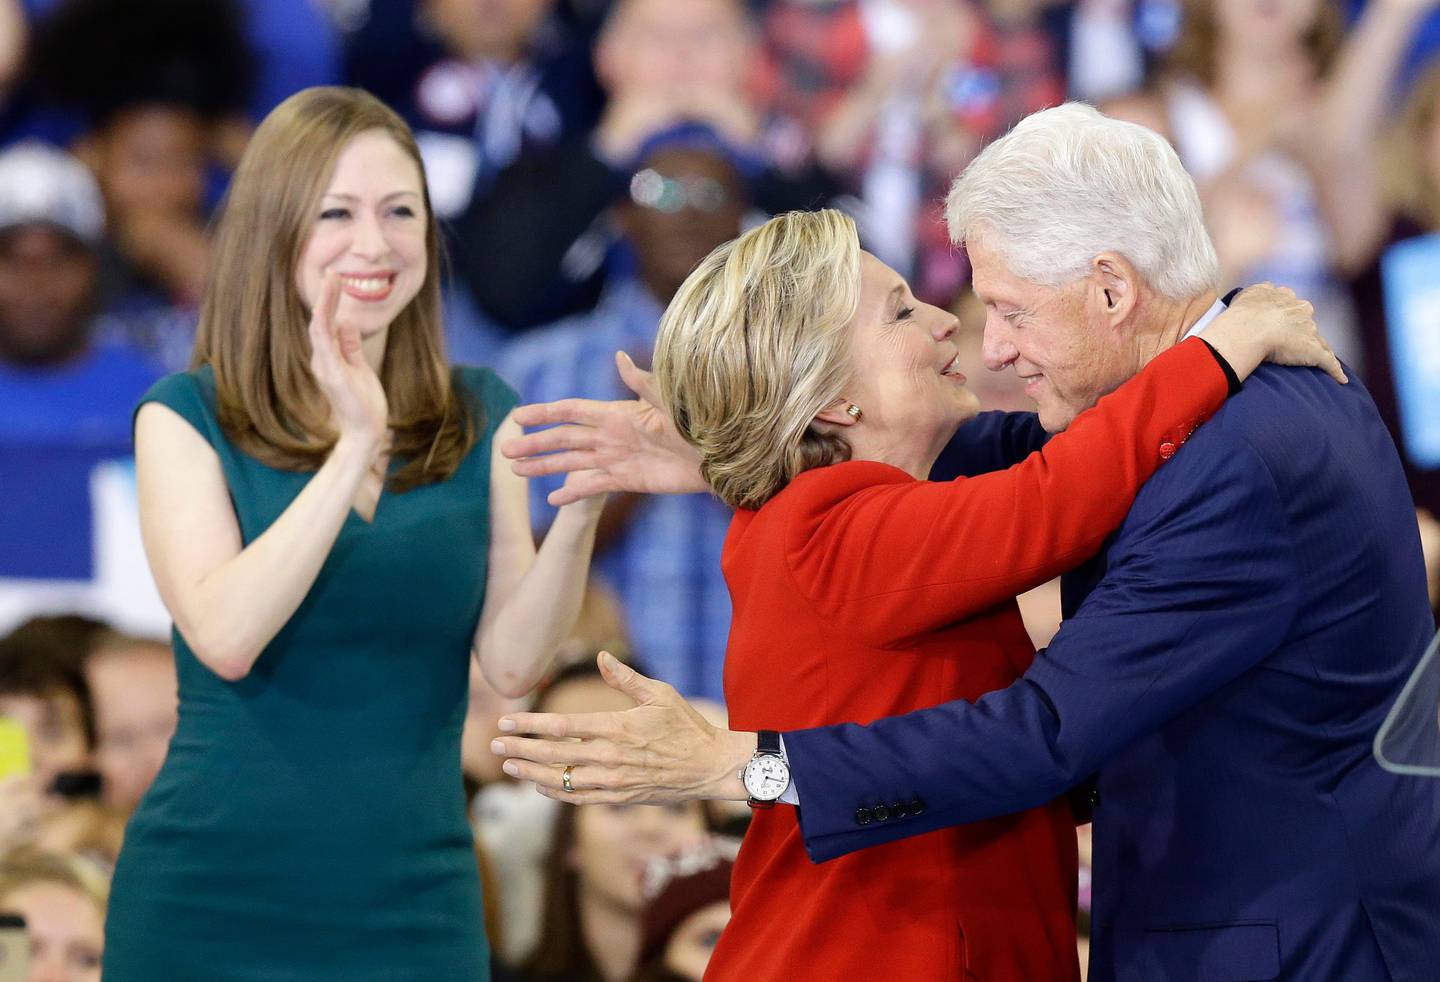 Democratic presidential candidate Hillary Clinton hugs her husband, former President Bill Clinton as their daughter Chelsea Clinton looks on during a campaign rally in Raleigh, N.C., Tuesday, Nov. 8, 2016. (AP Photo/Gerry Broome)